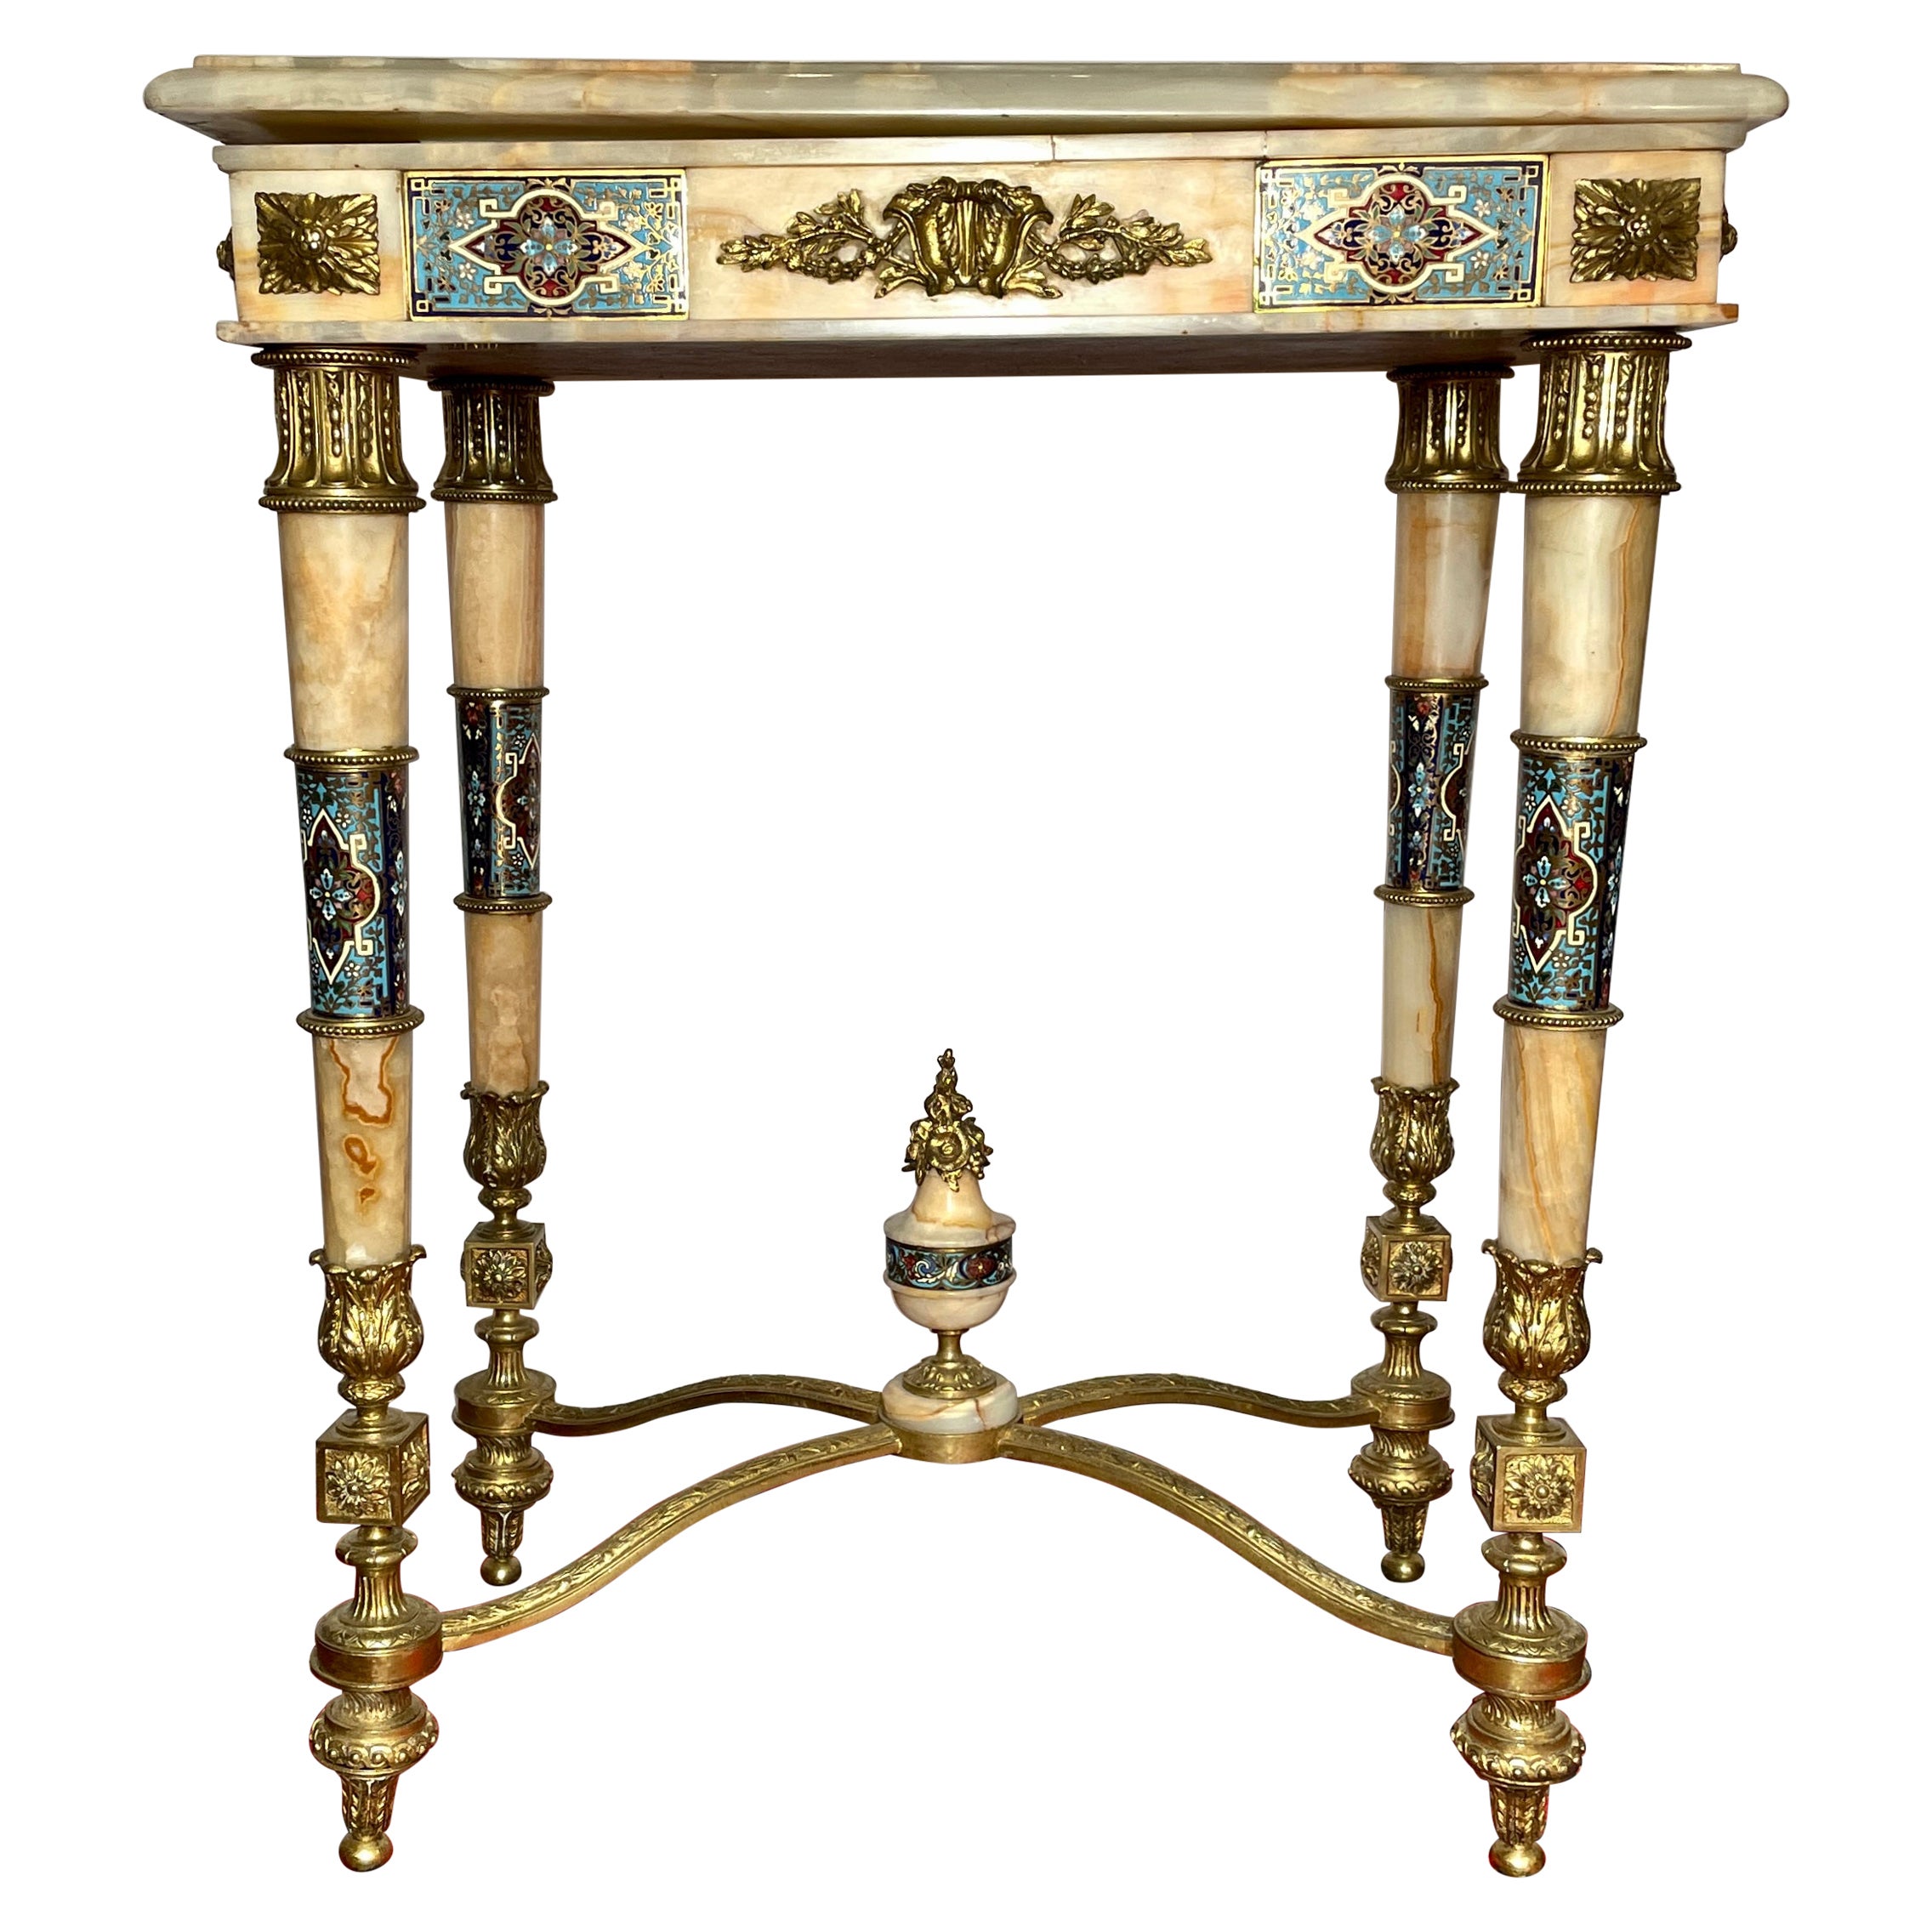 Antique Russian Onyx Marble, Ormolu and Enamel Porcelain Table, Circa 1875-1885 For Sale